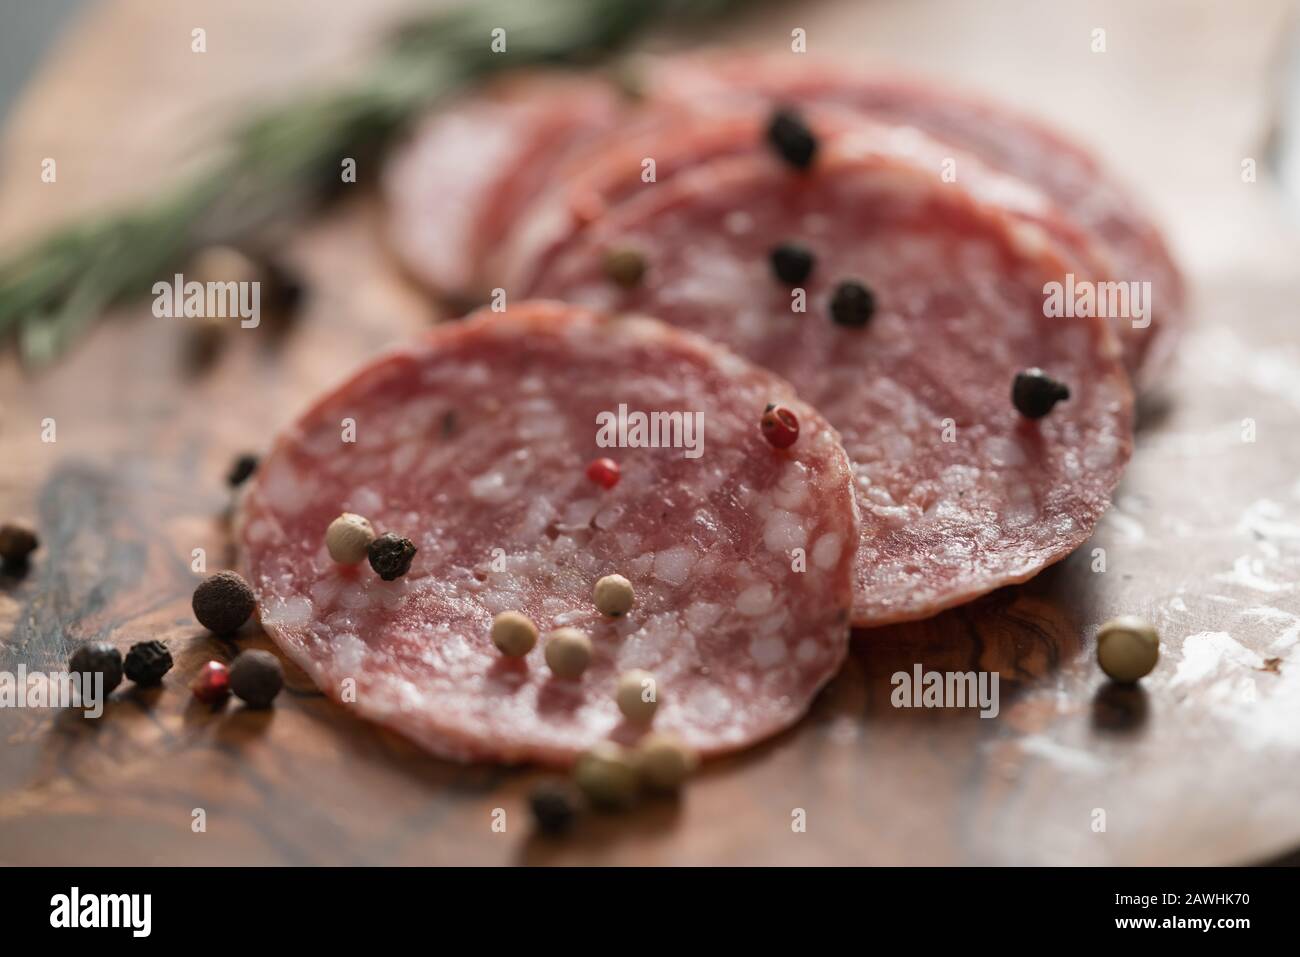 Sliced salame milano sausage on olive wood board with rosemary and pepper, shallow focus Stock Photo